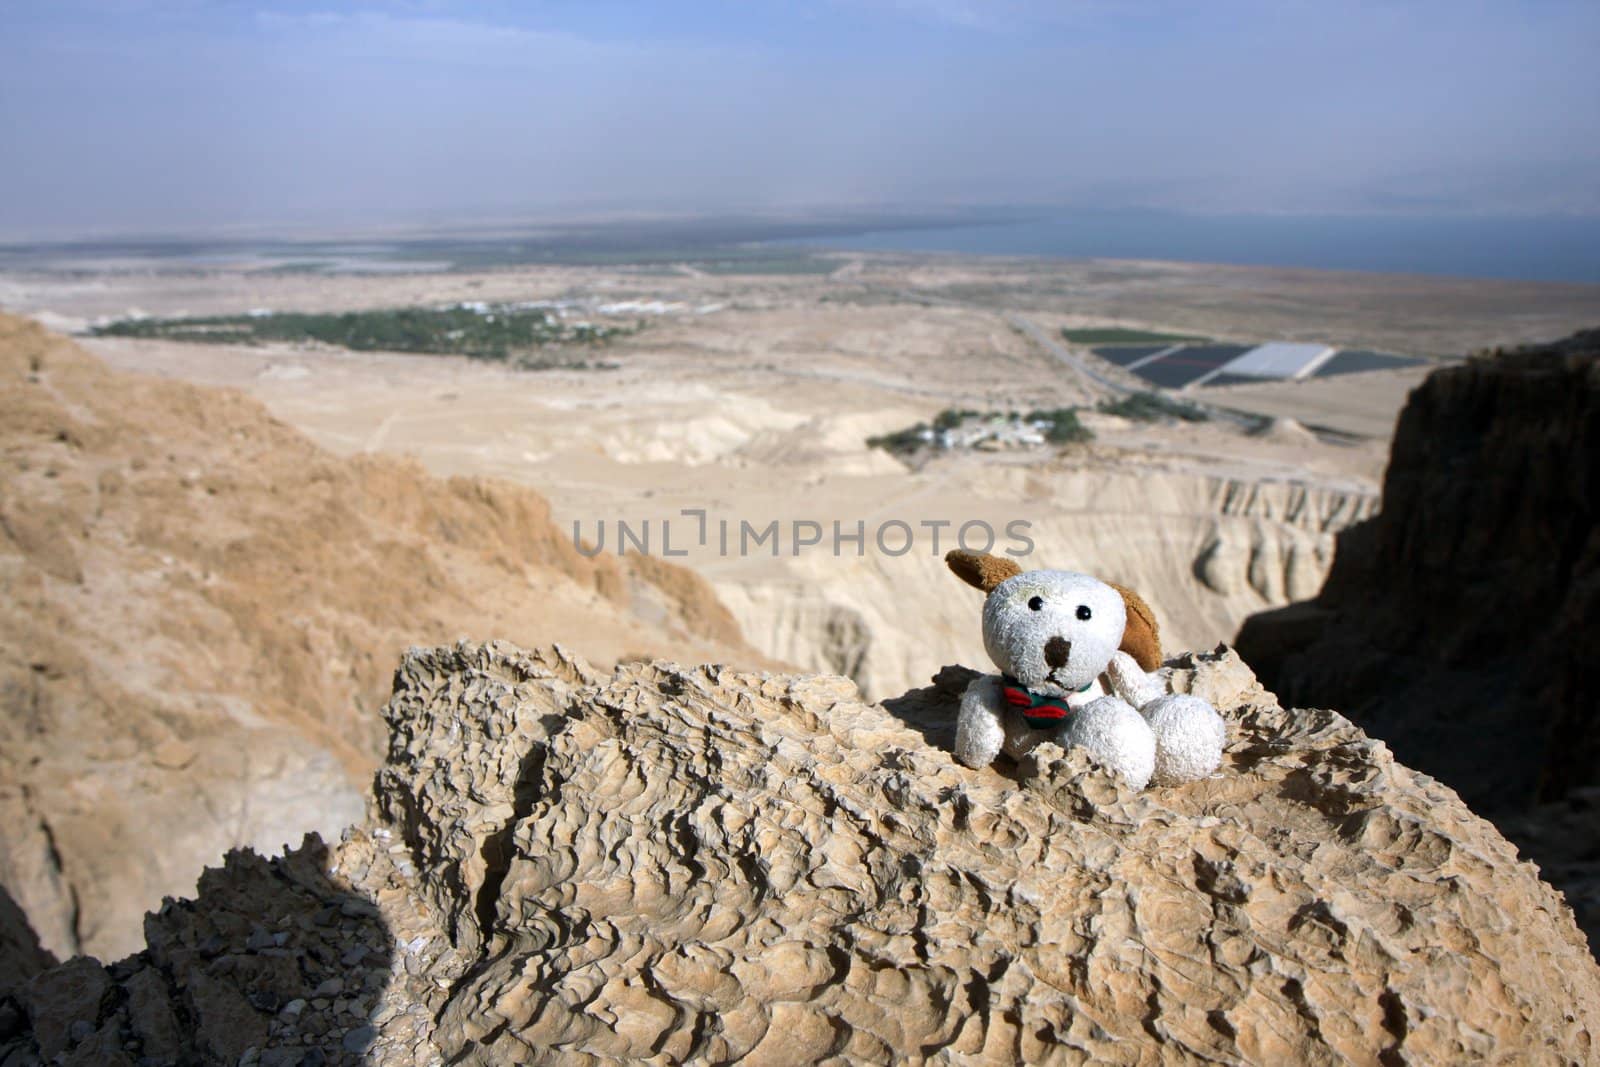 View to the Dead Sea from Kumeran